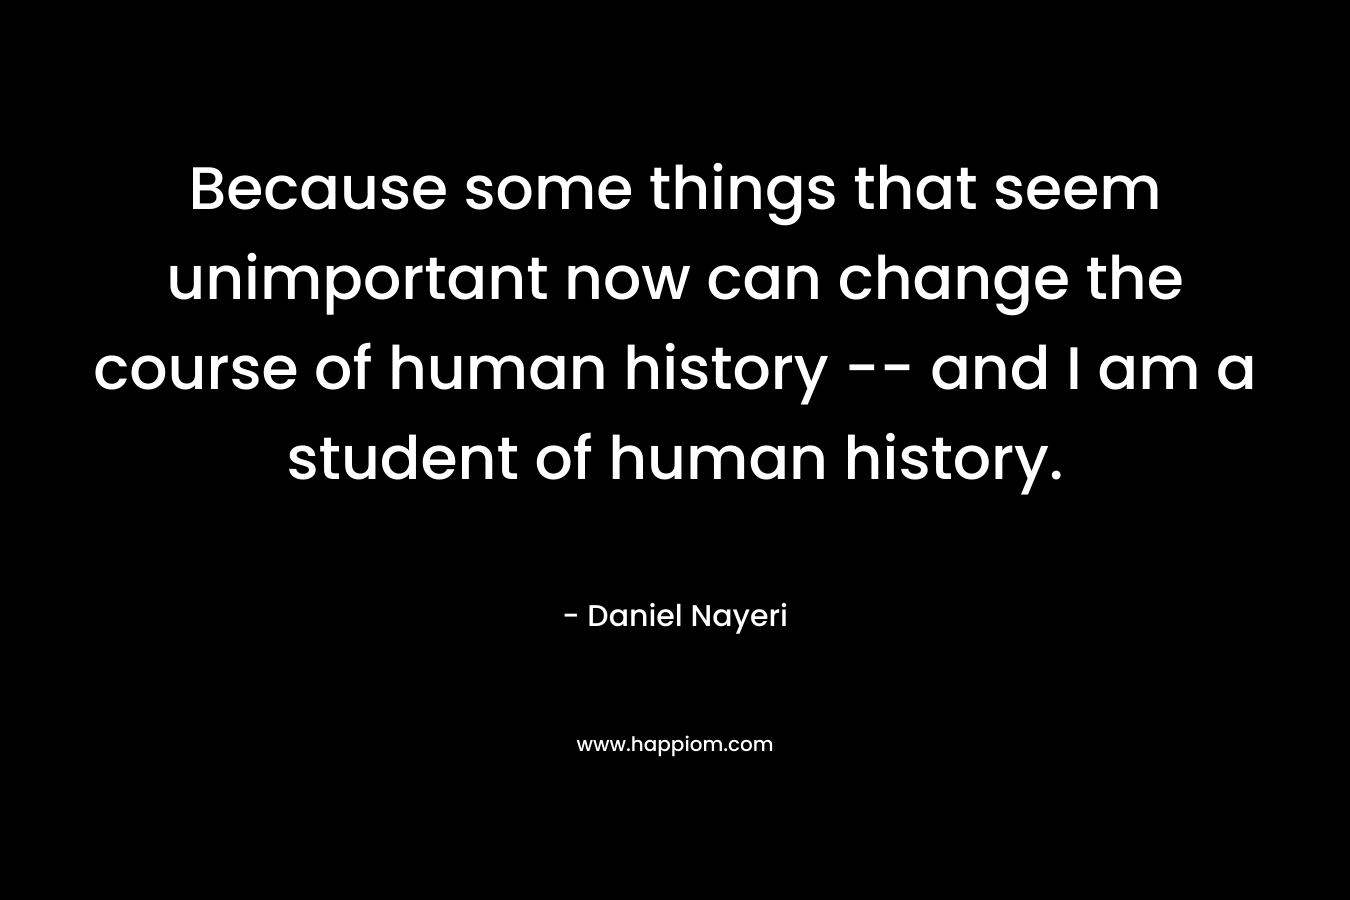 Because some things that seem unimportant now can change the course of human history — and I am a student of human history. – Daniel Nayeri